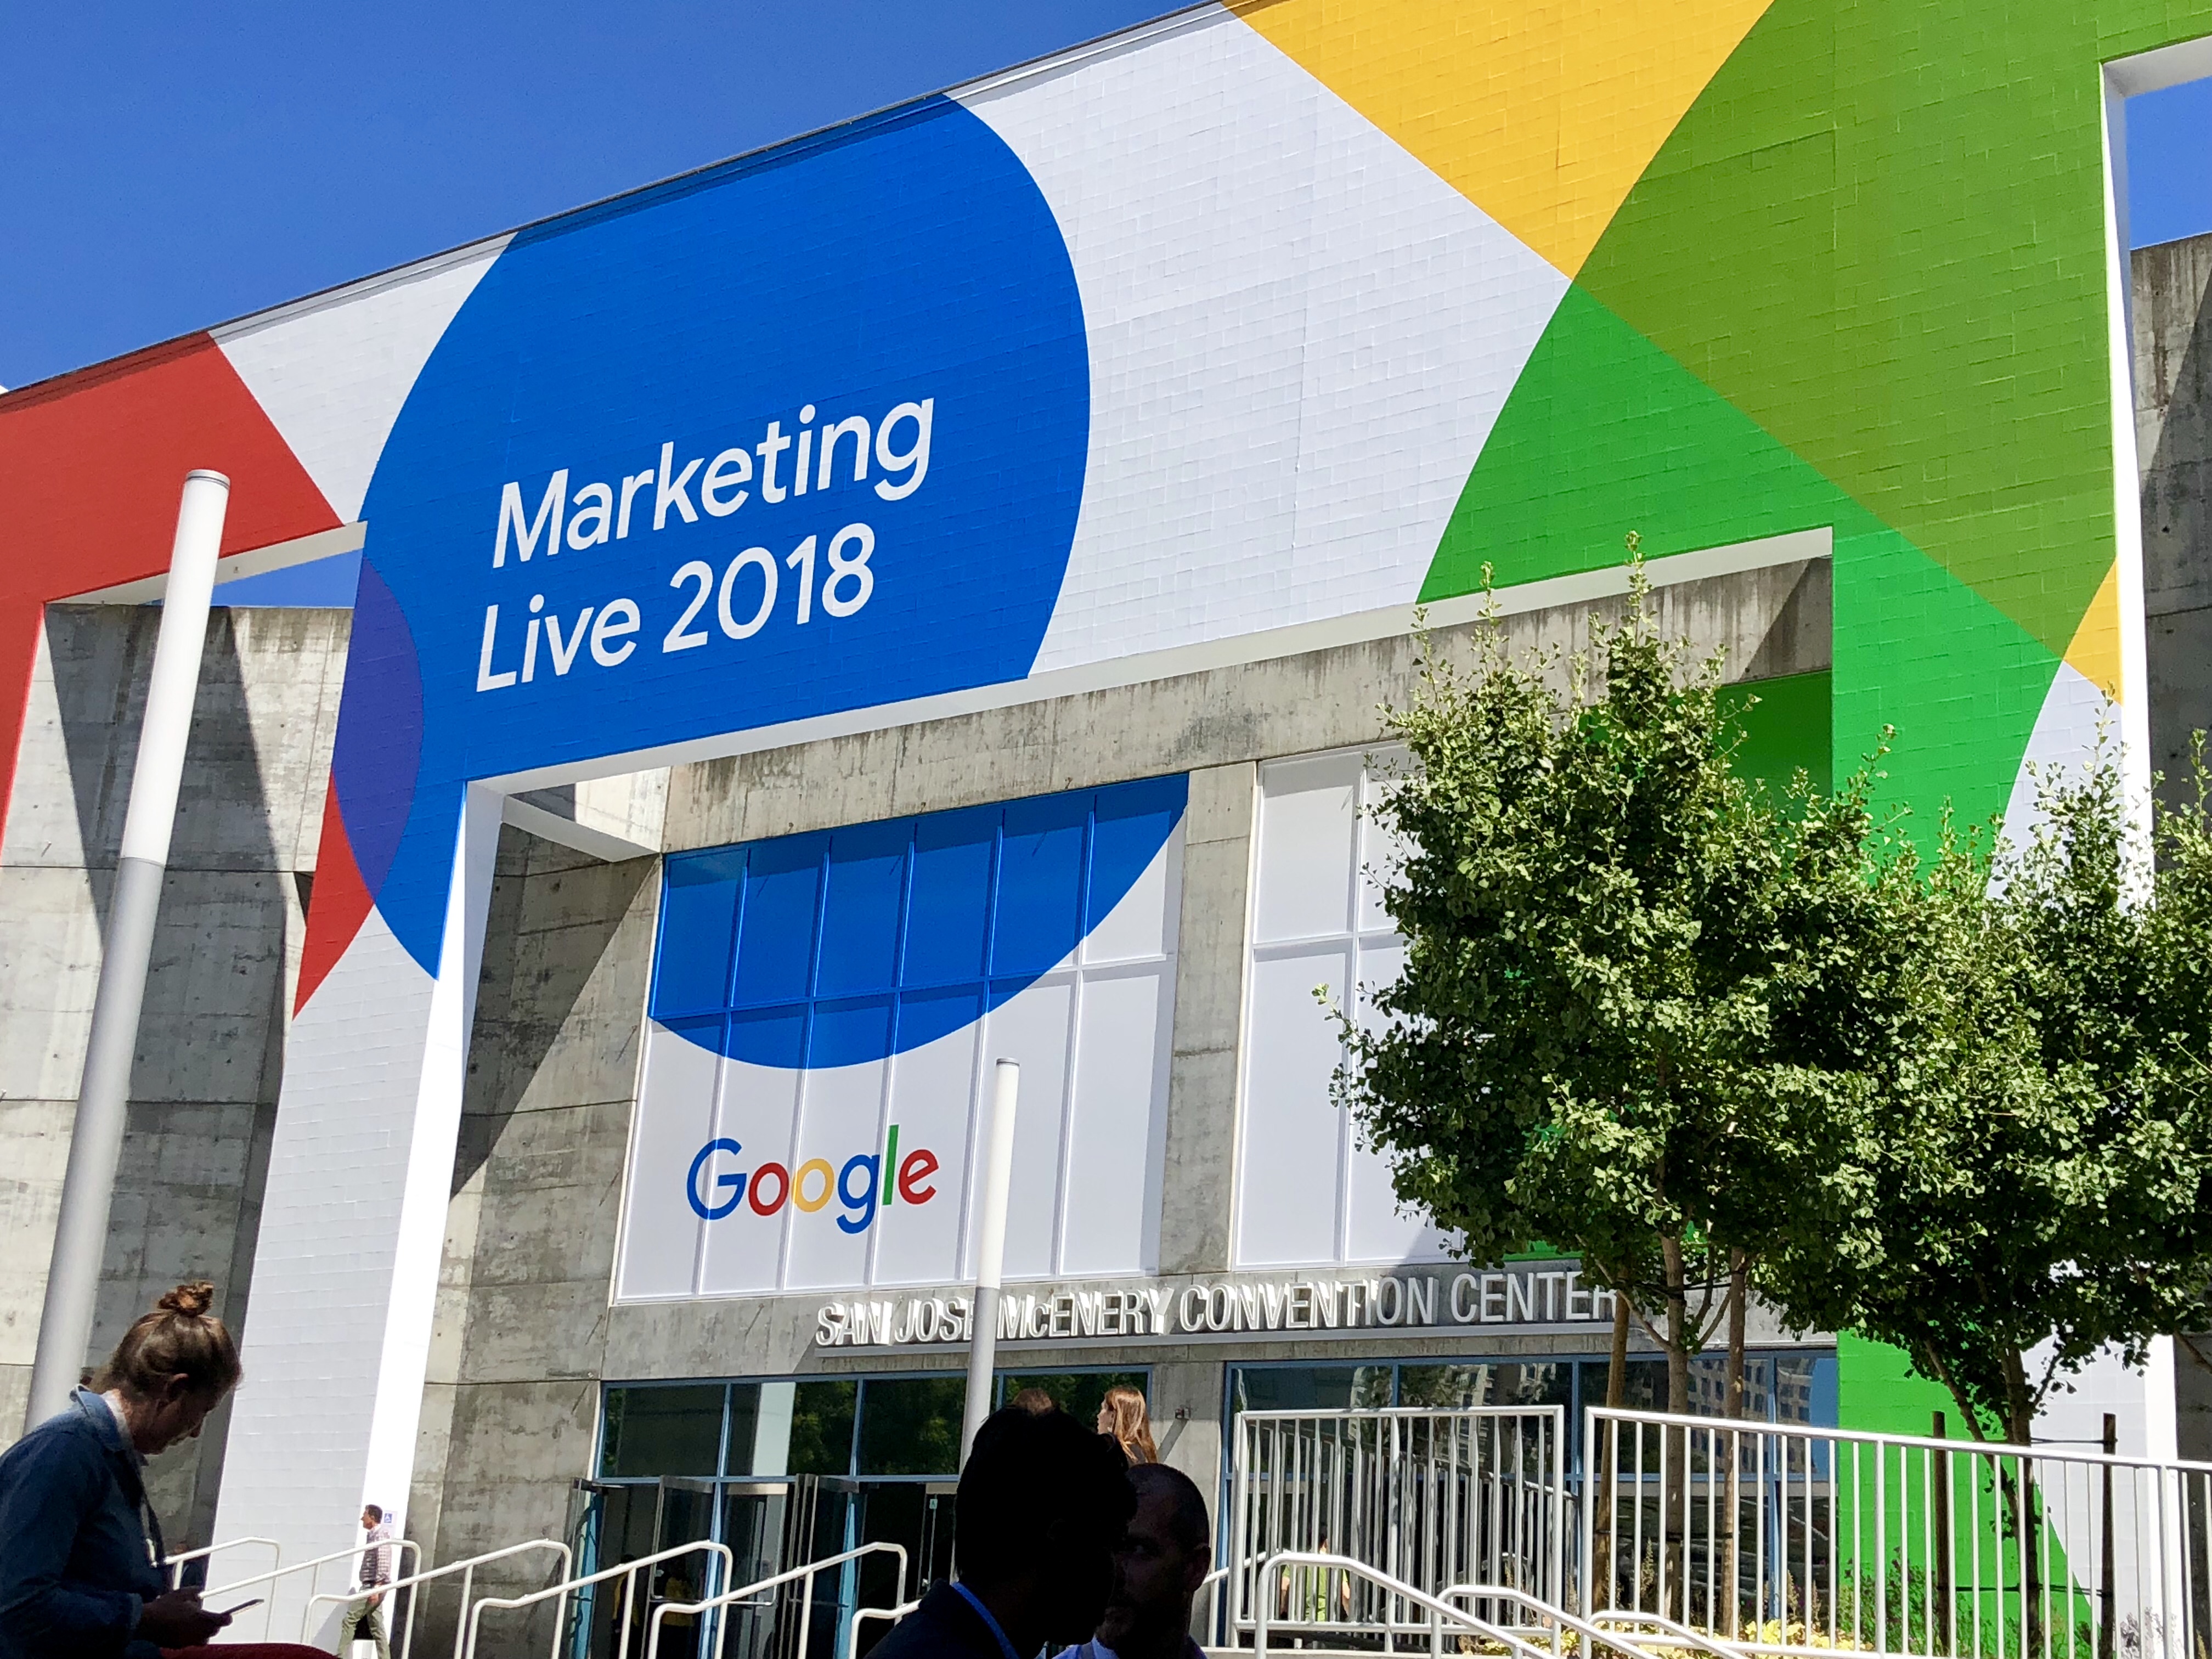 Google Machine Learning Was the Talk at Google Marketing Live